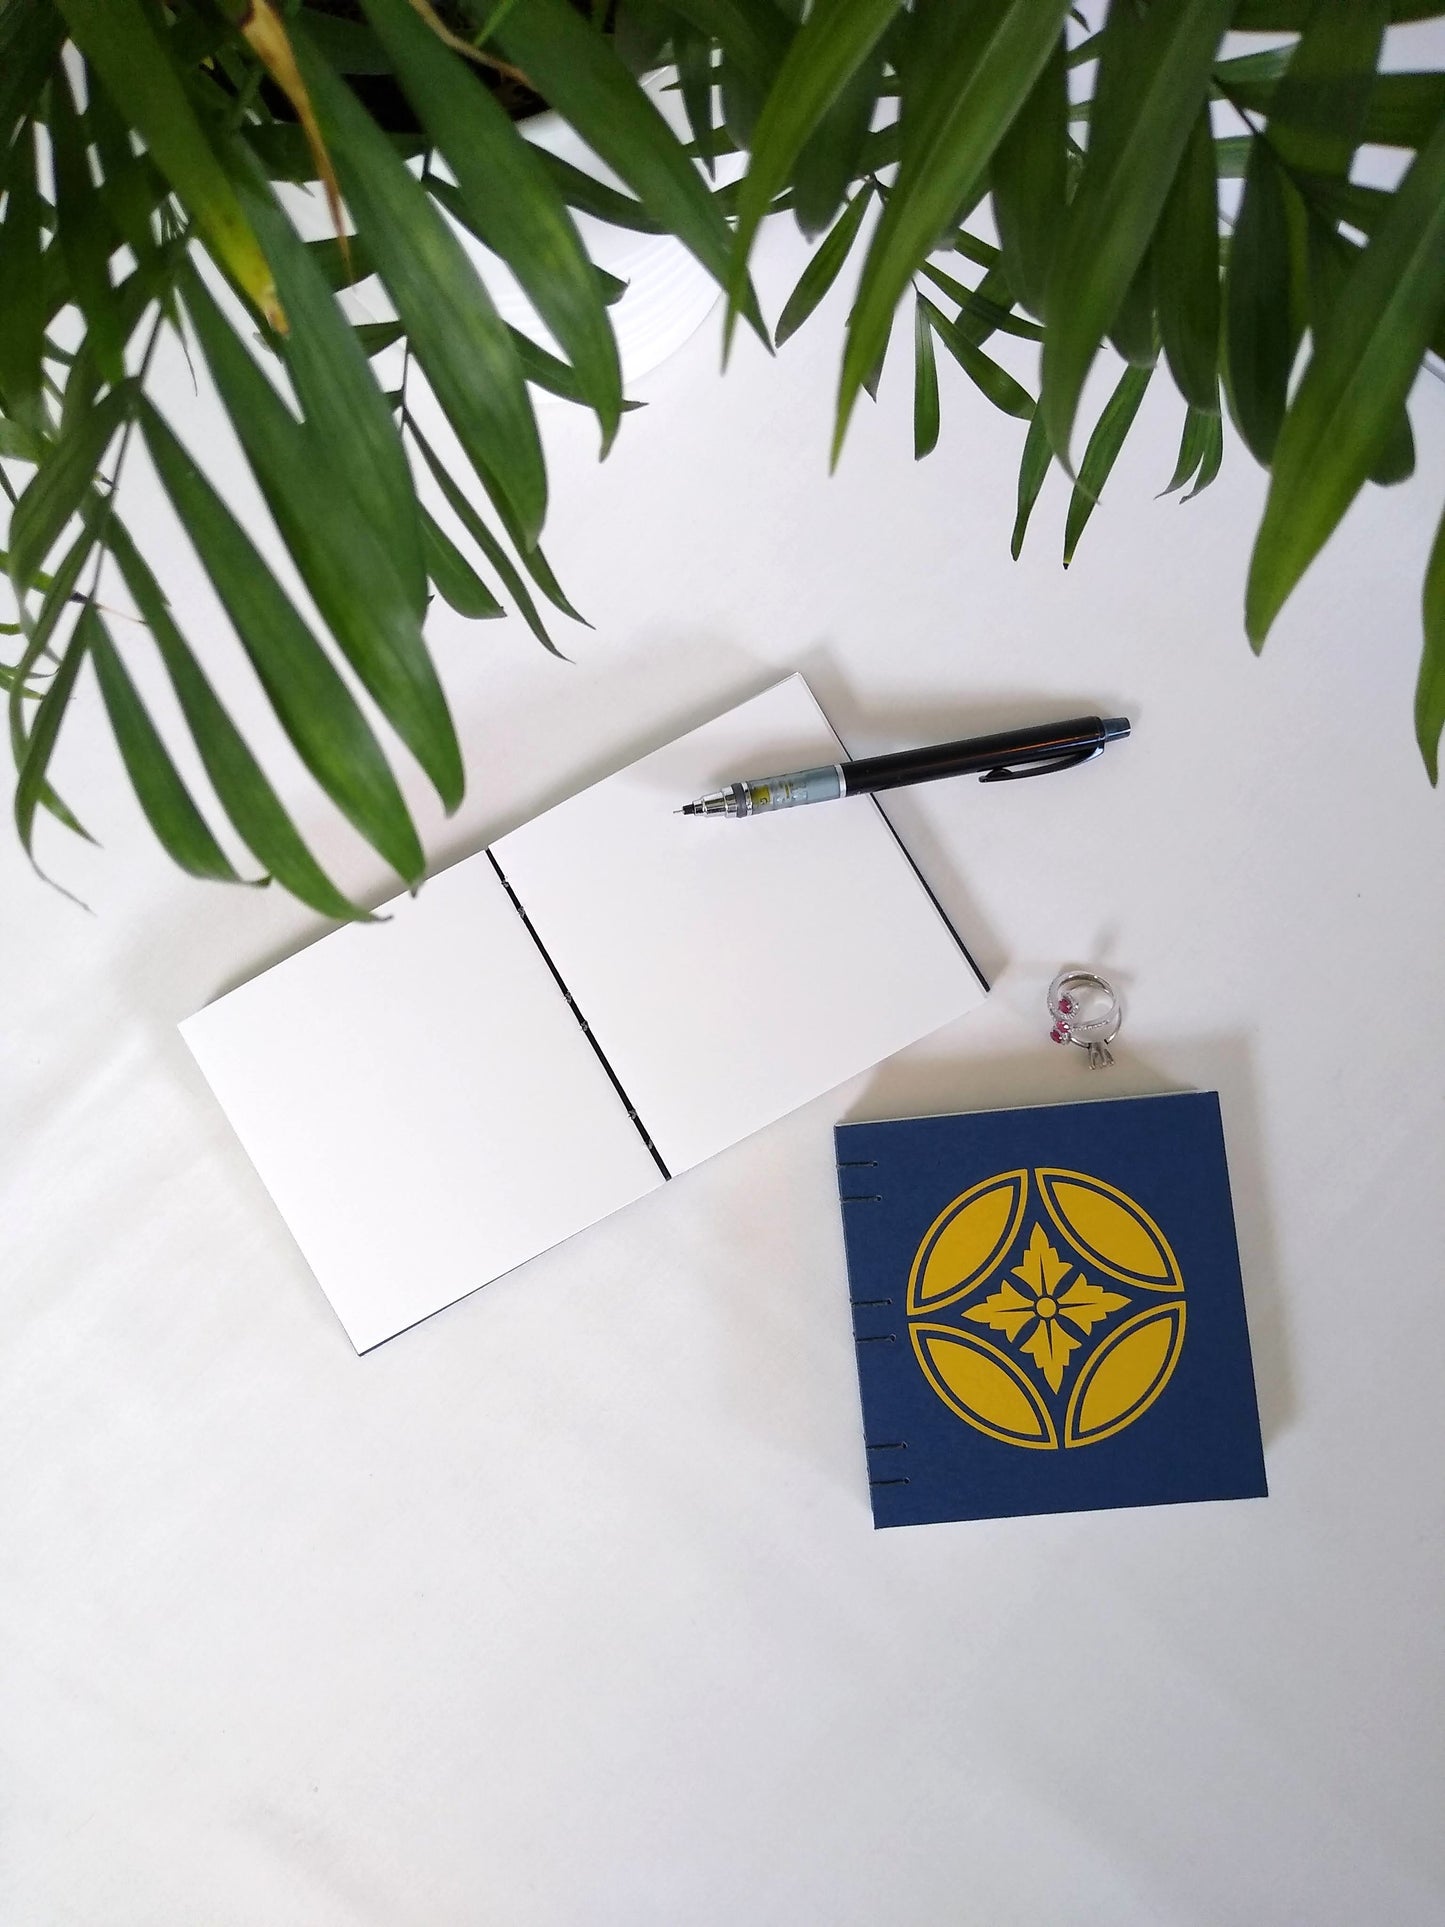 An open journal lays on a white desk next to a potted plant. The journal has a blue thread connecting the pages at the spine and a black mechanical pencil rests across the blank white pages. Beside it are two rings and another journal, closed, with a gold japanese inspired floral emblem on the cover.